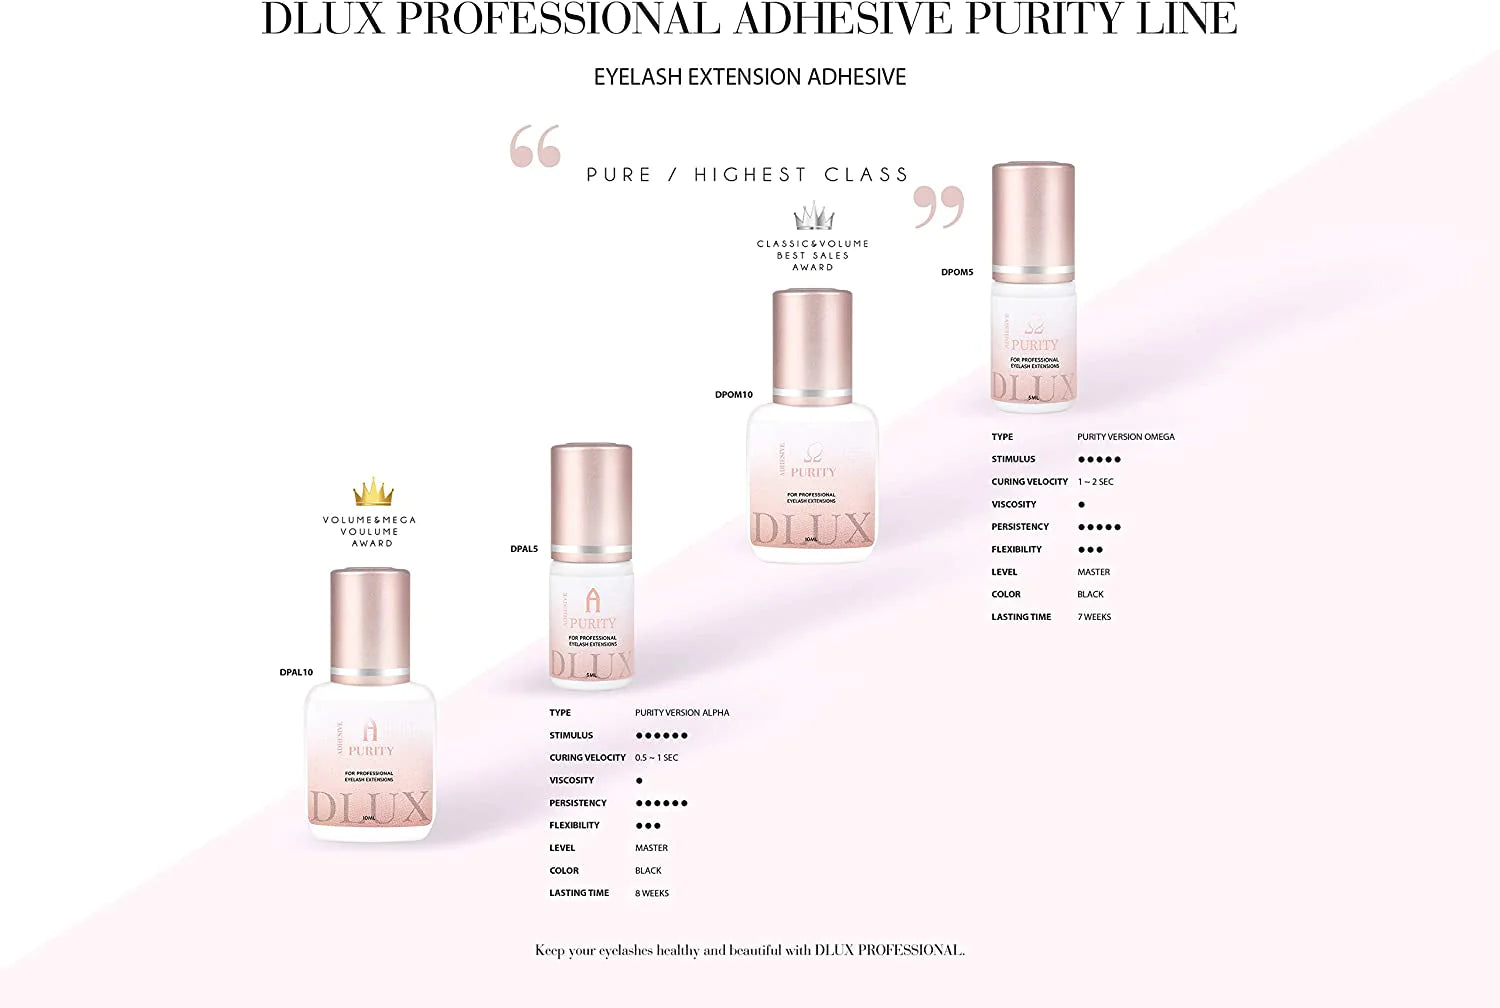 Dlux Professional Adhesive Purity Line